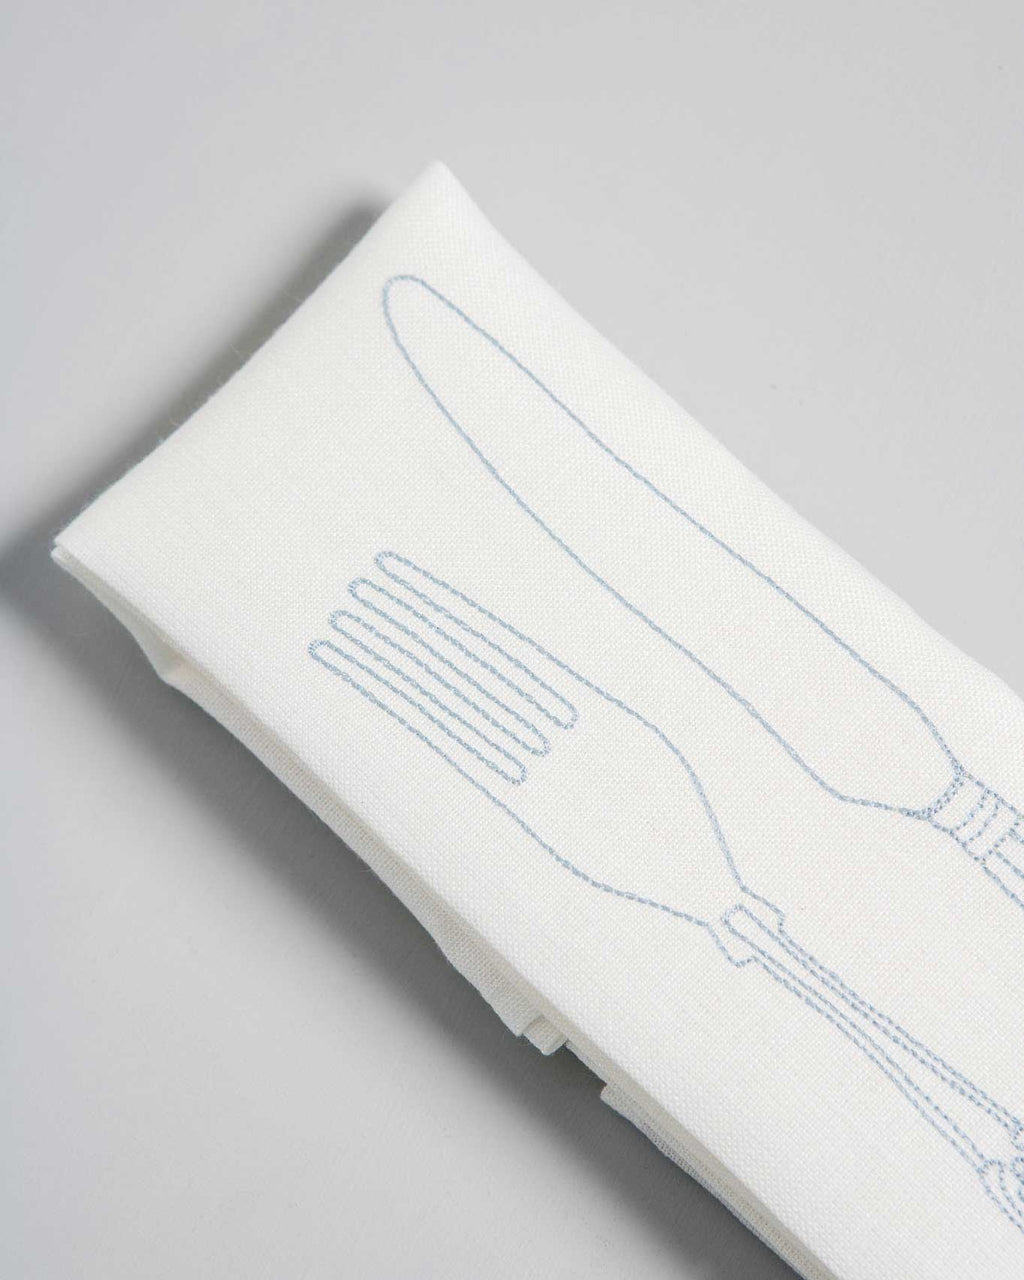 'Silver Service' Embroidered Irish Linen napkins with powder blue embroidery